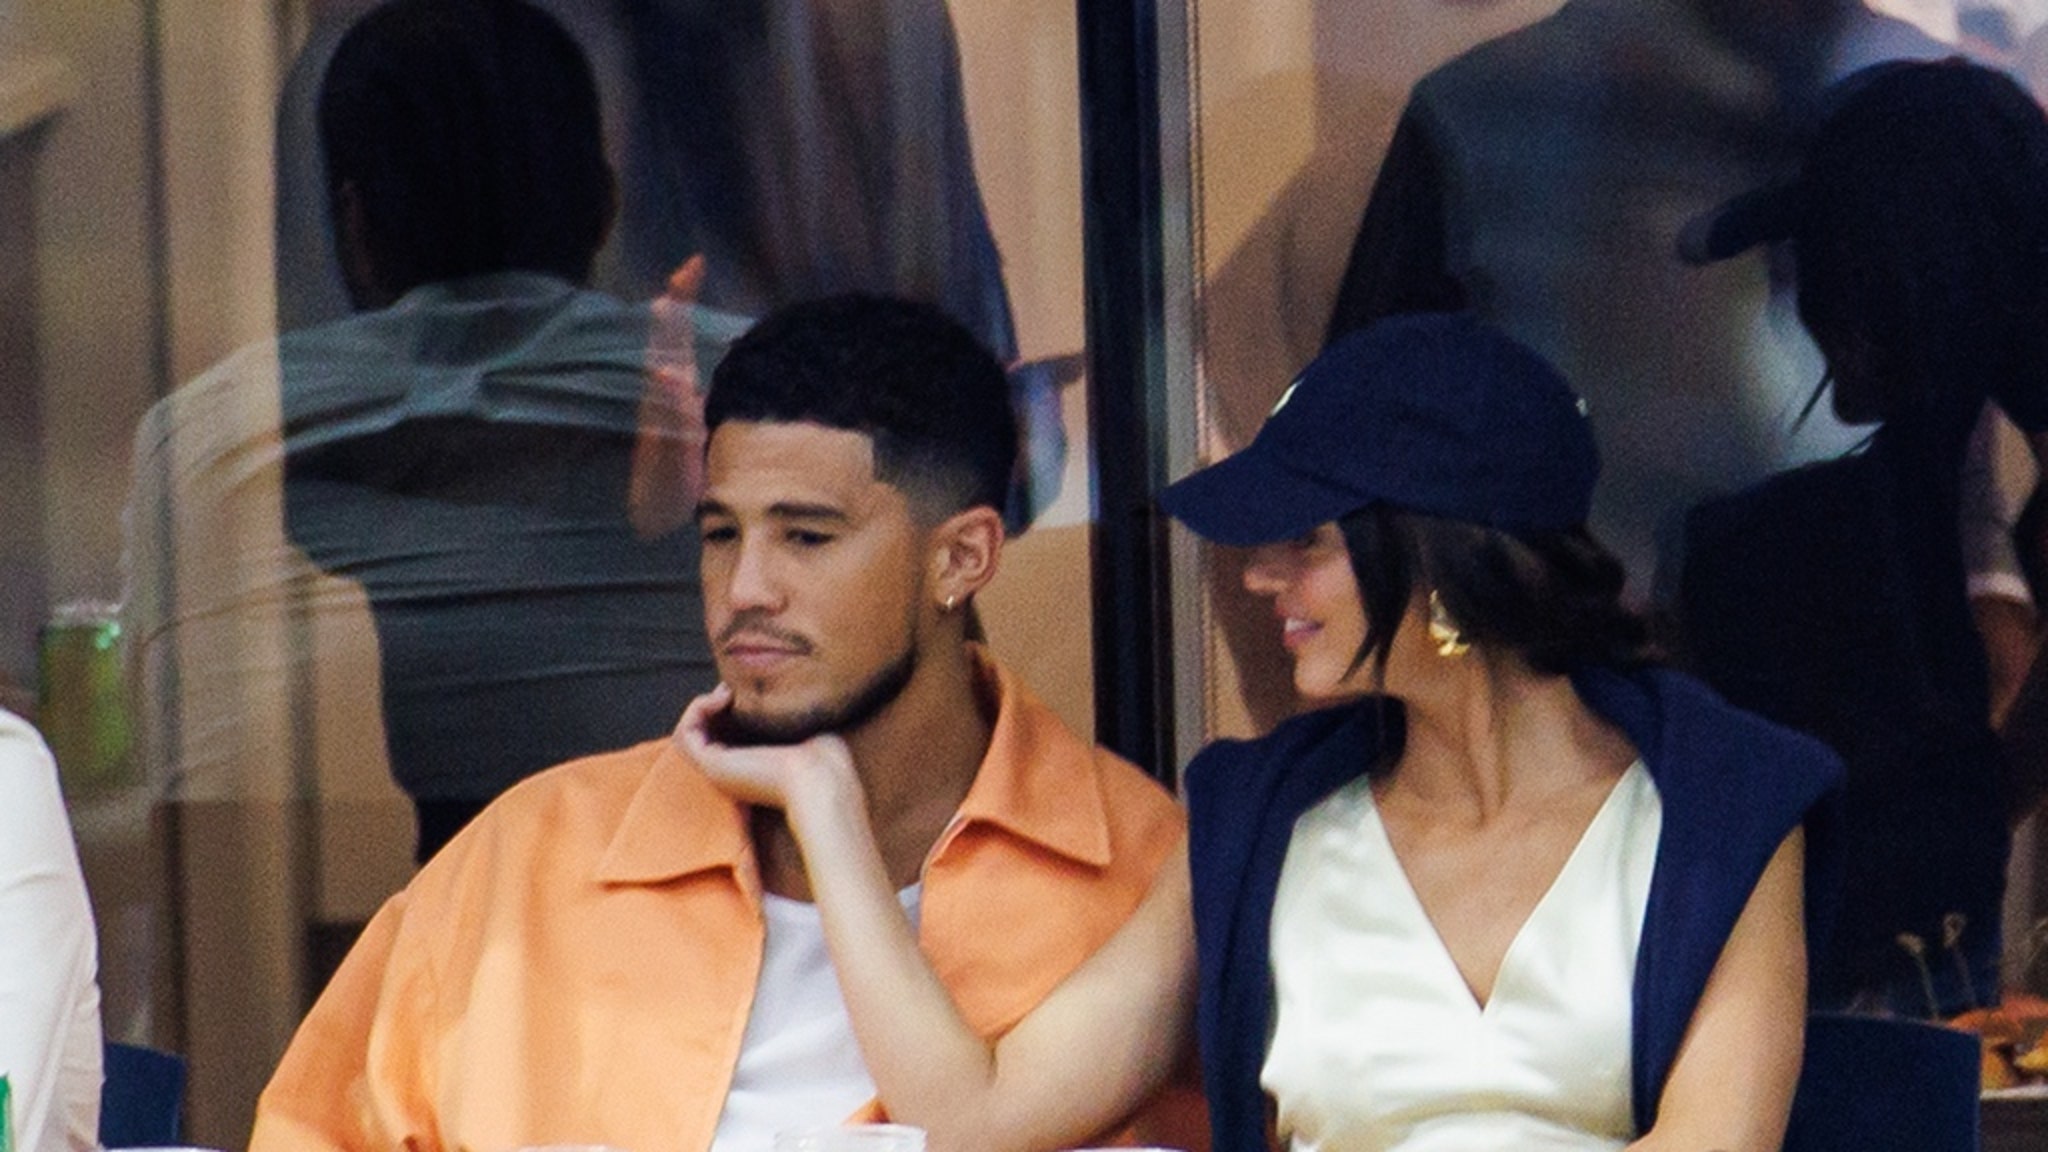 Kendall Jenner and Devin Booker -- PDA at U.S. Open